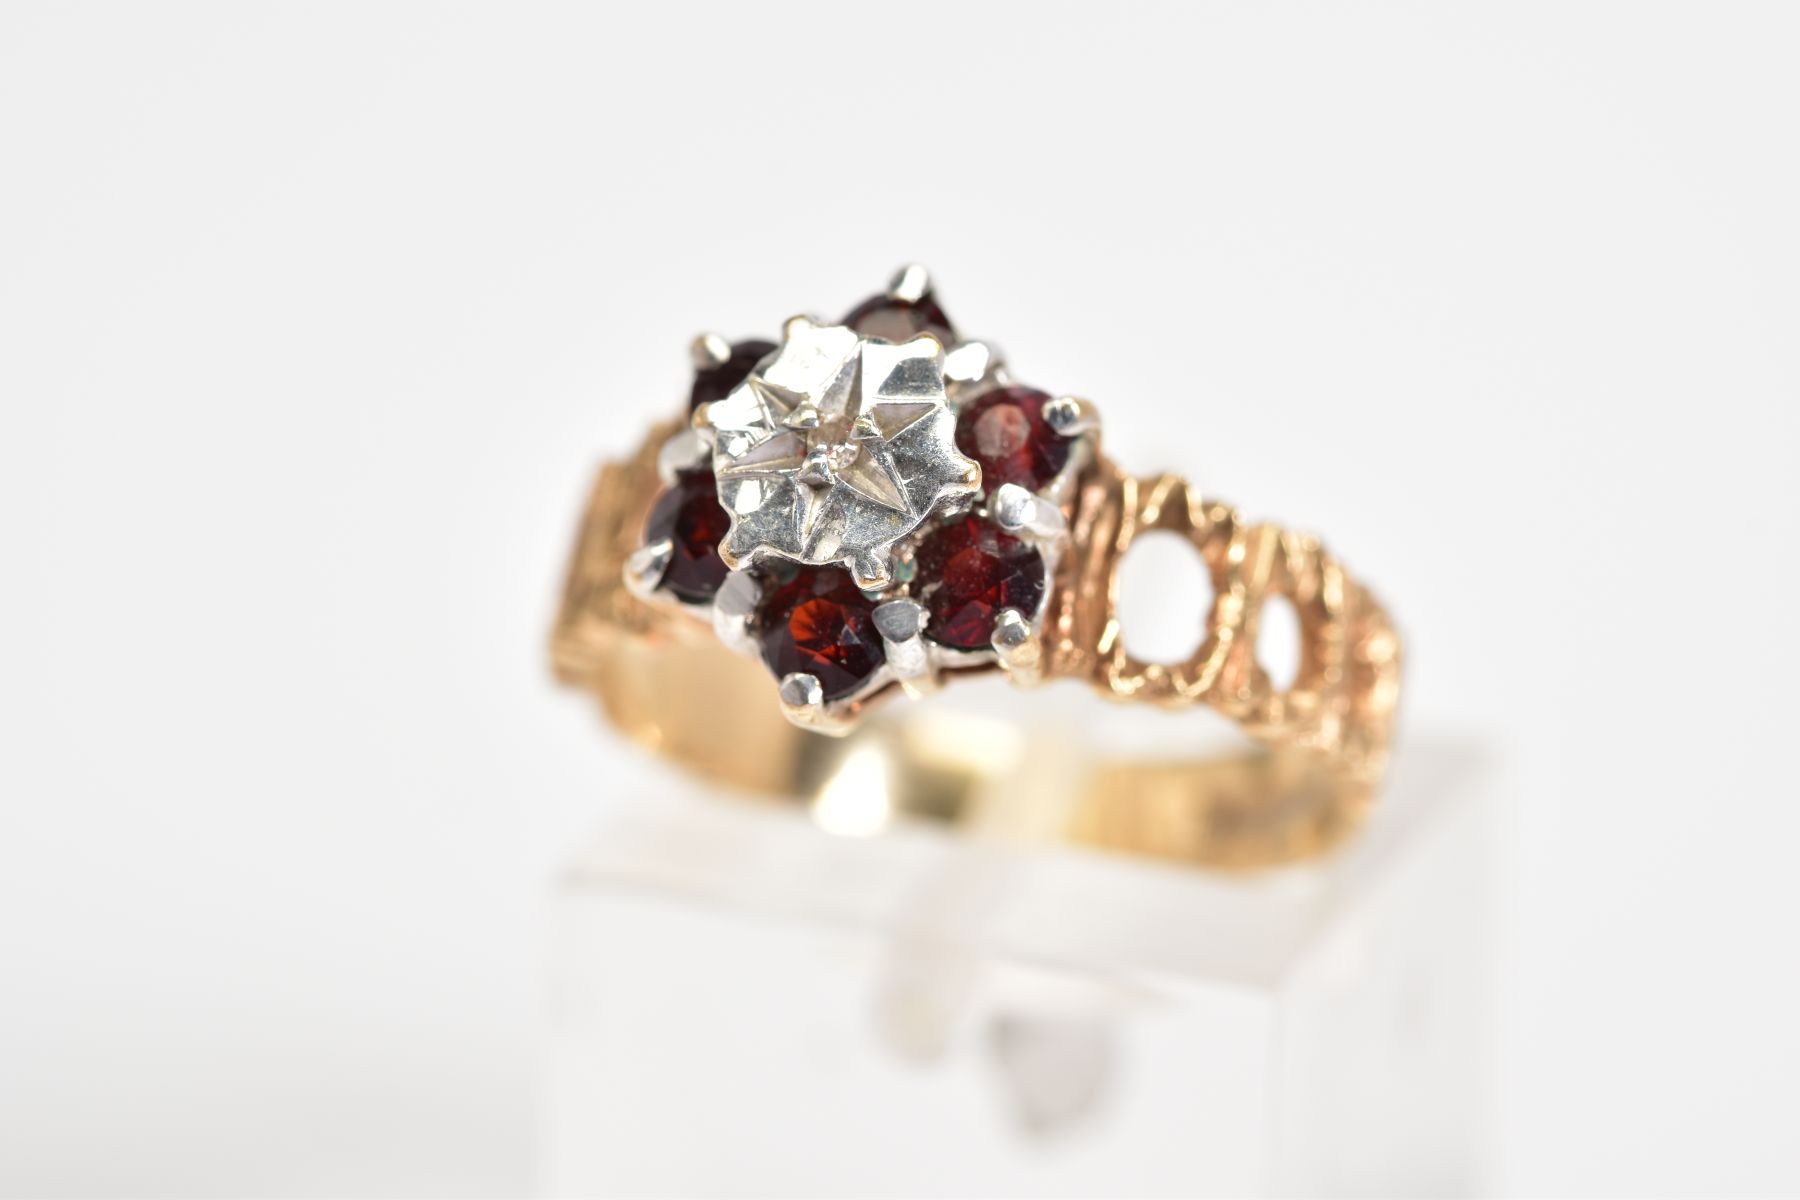 A 9CT GOLD CLUSTER RING, of tiered design set with a central single cut diamond, with a circular cut